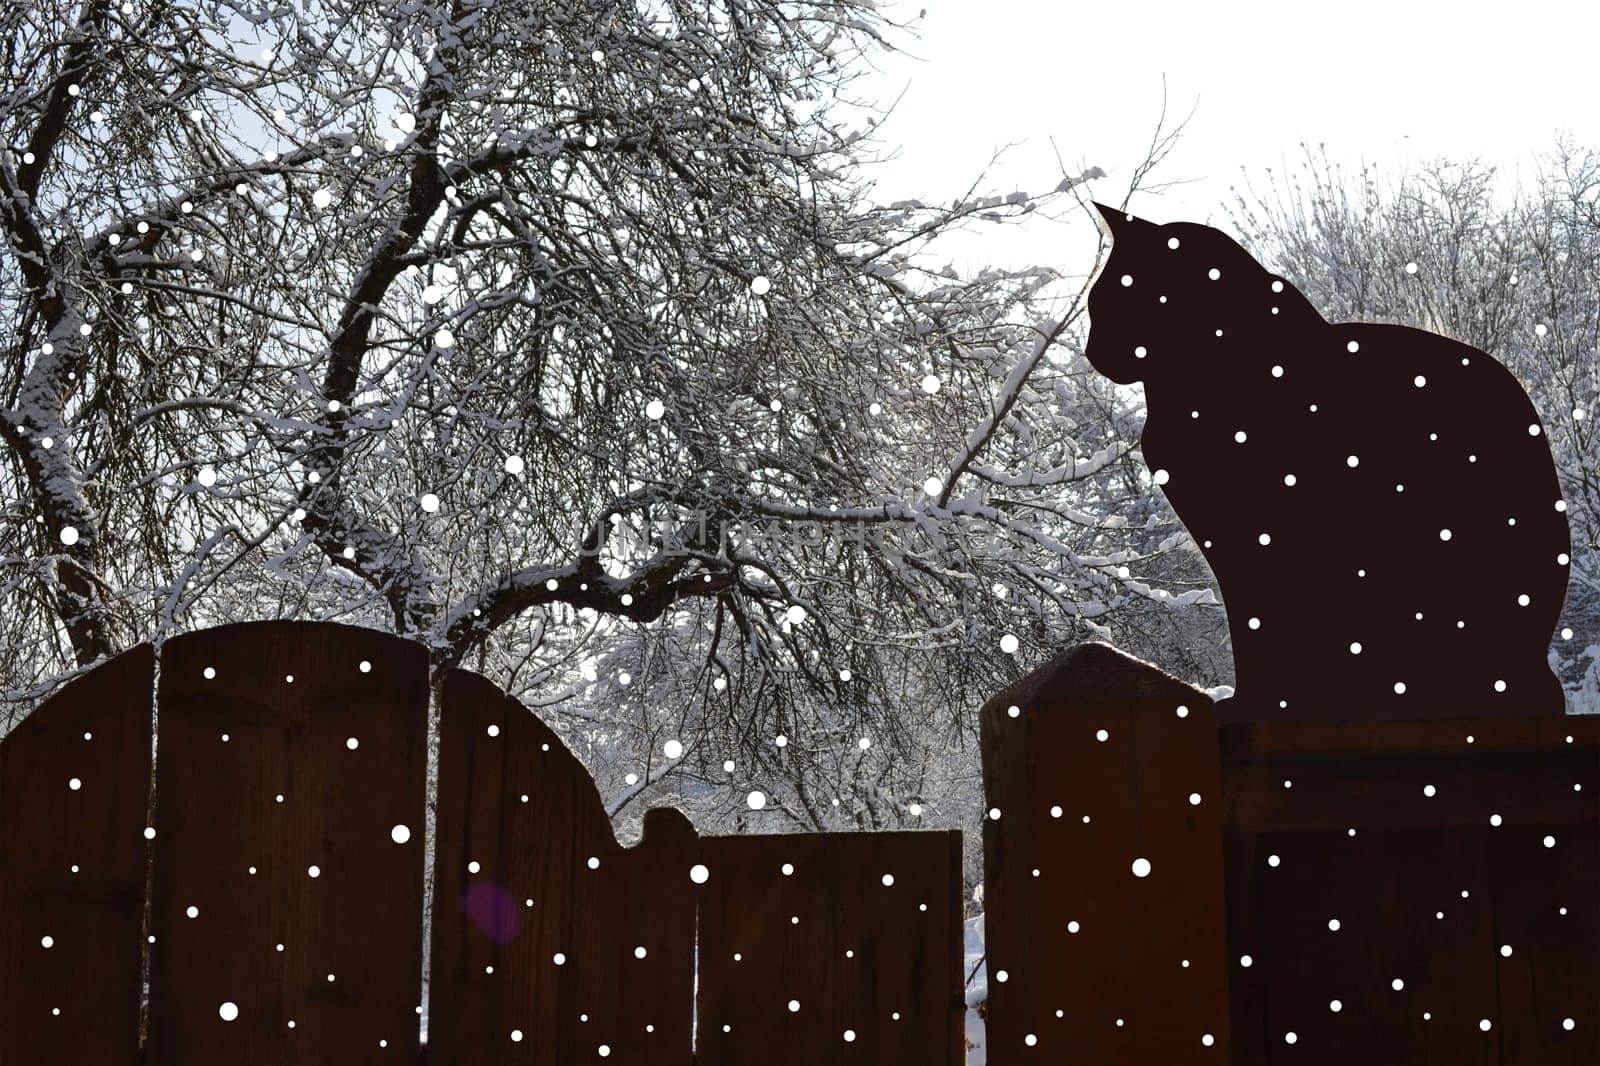 Winter landscape with black cat on a fence